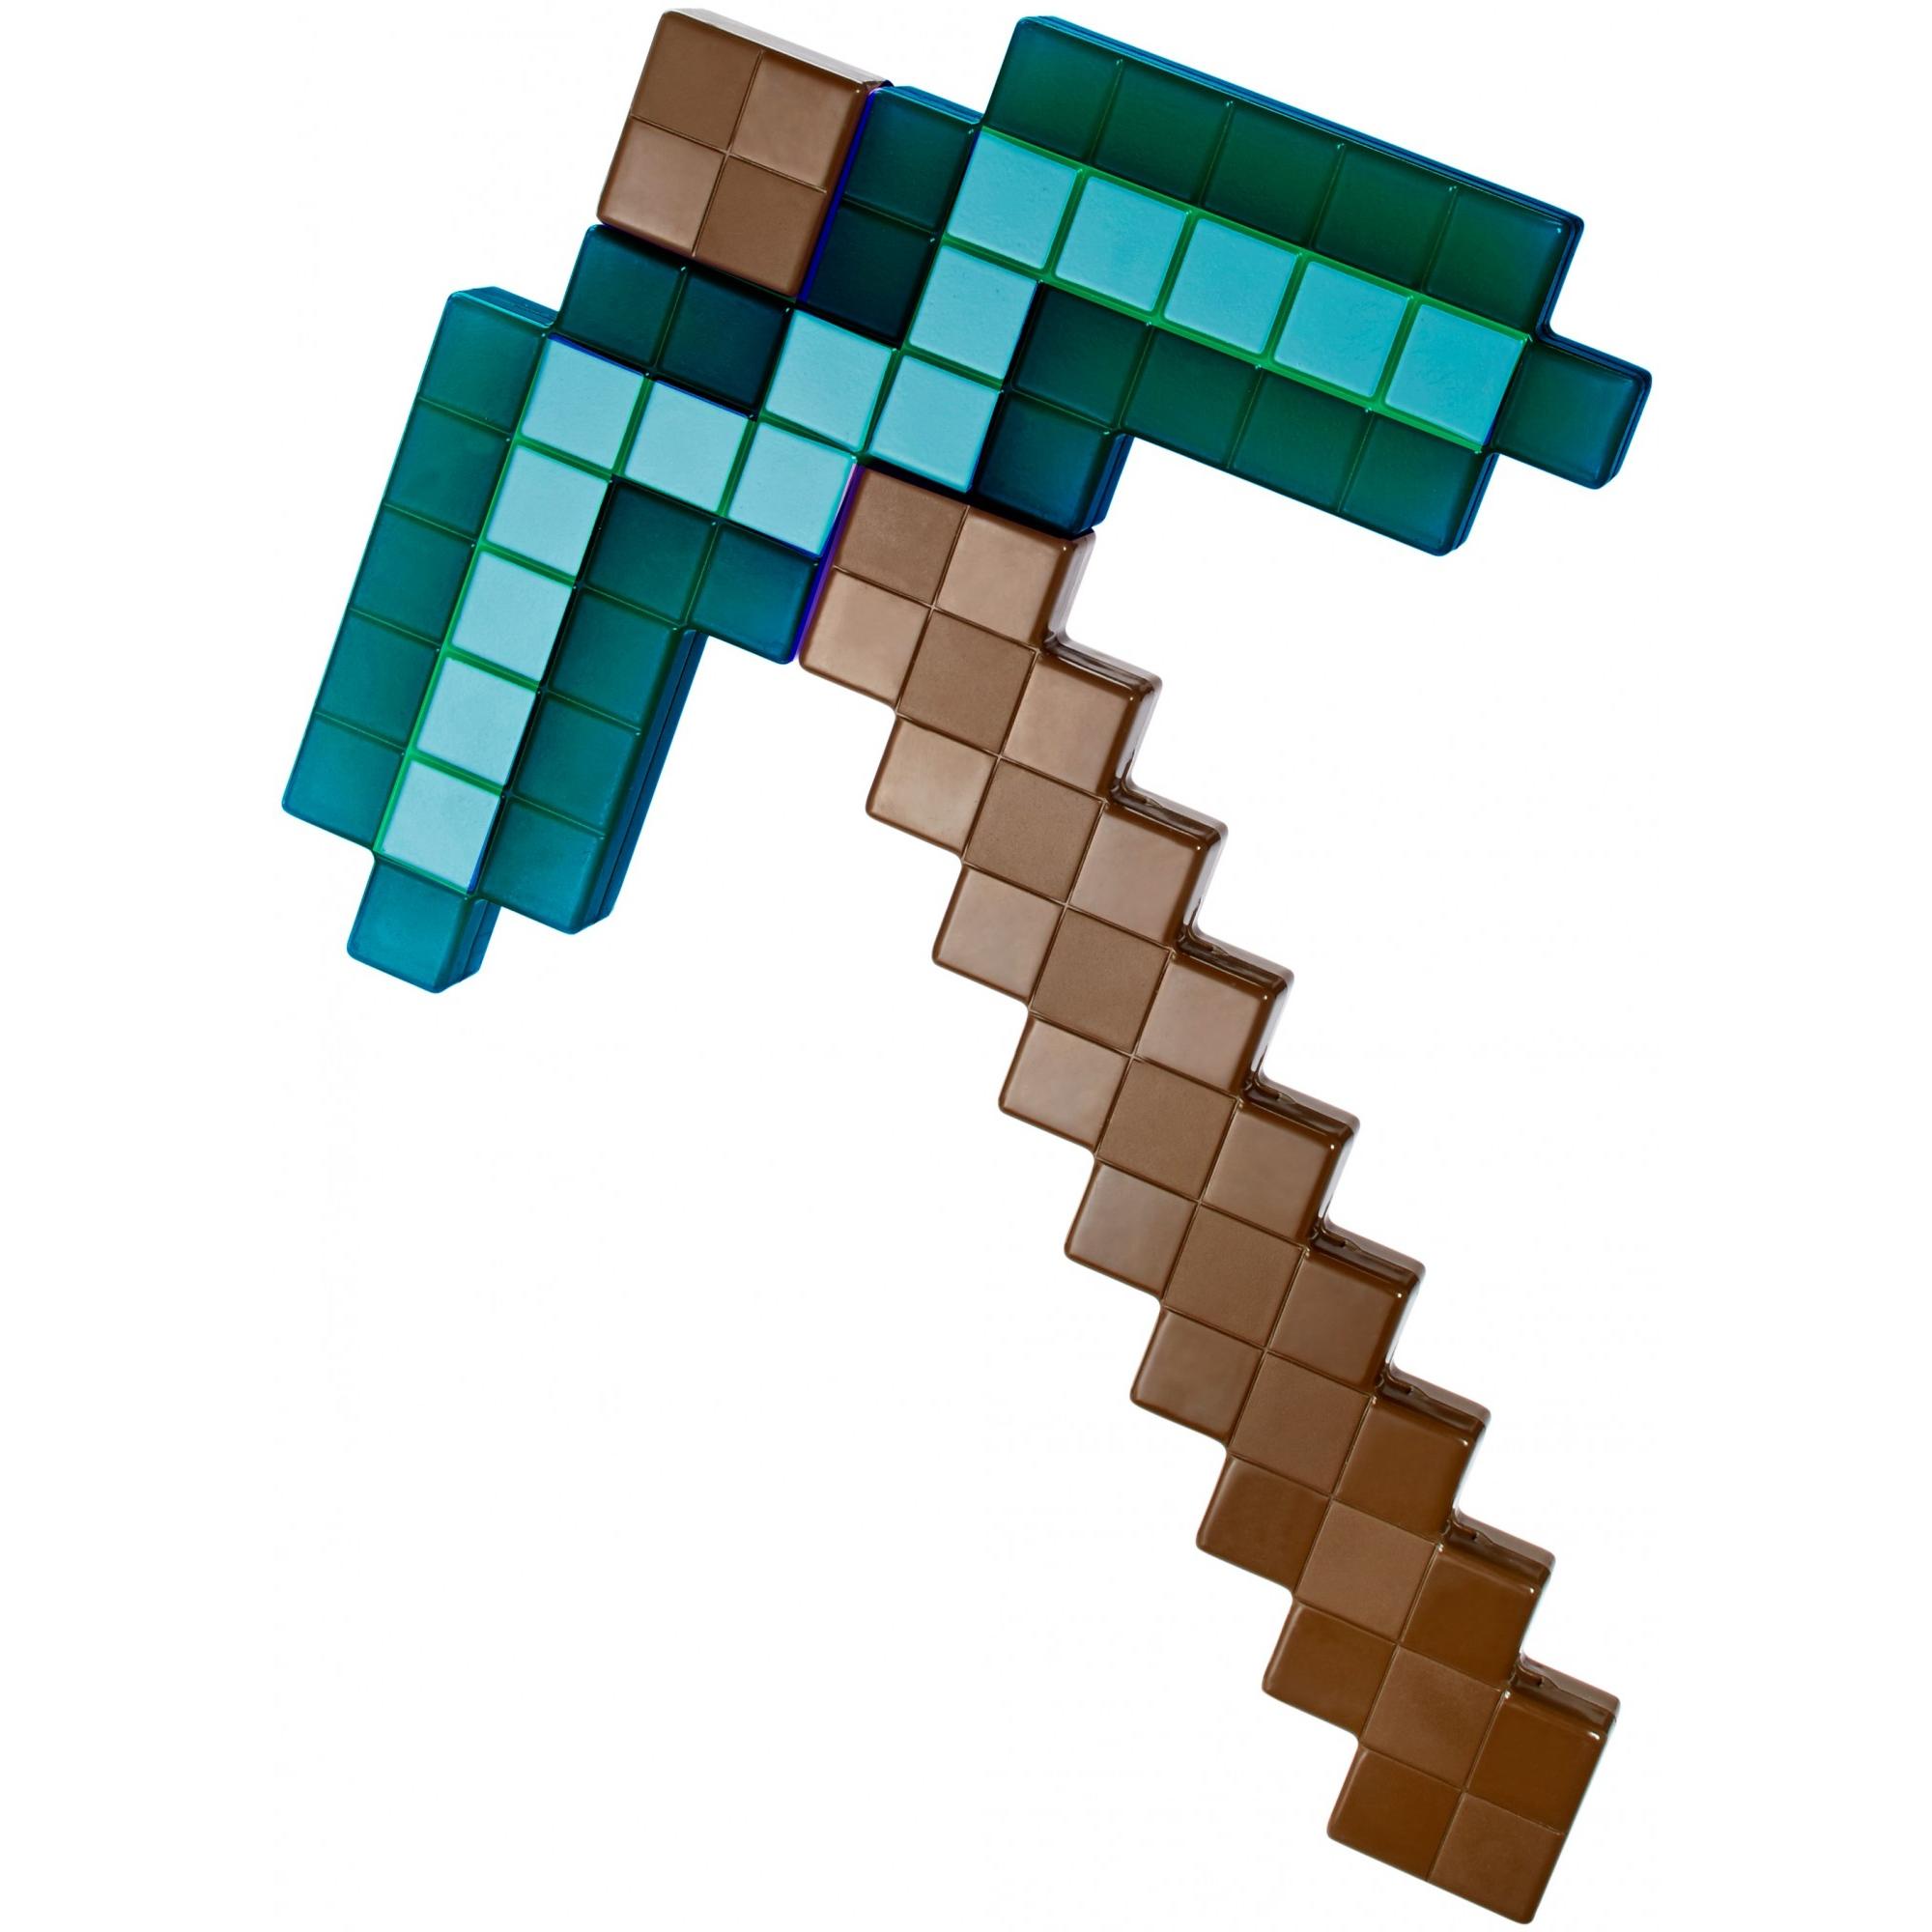 Minecraft Diamond Pickaxe, Life-Sized for Role-Play Fun - image 3 of 4